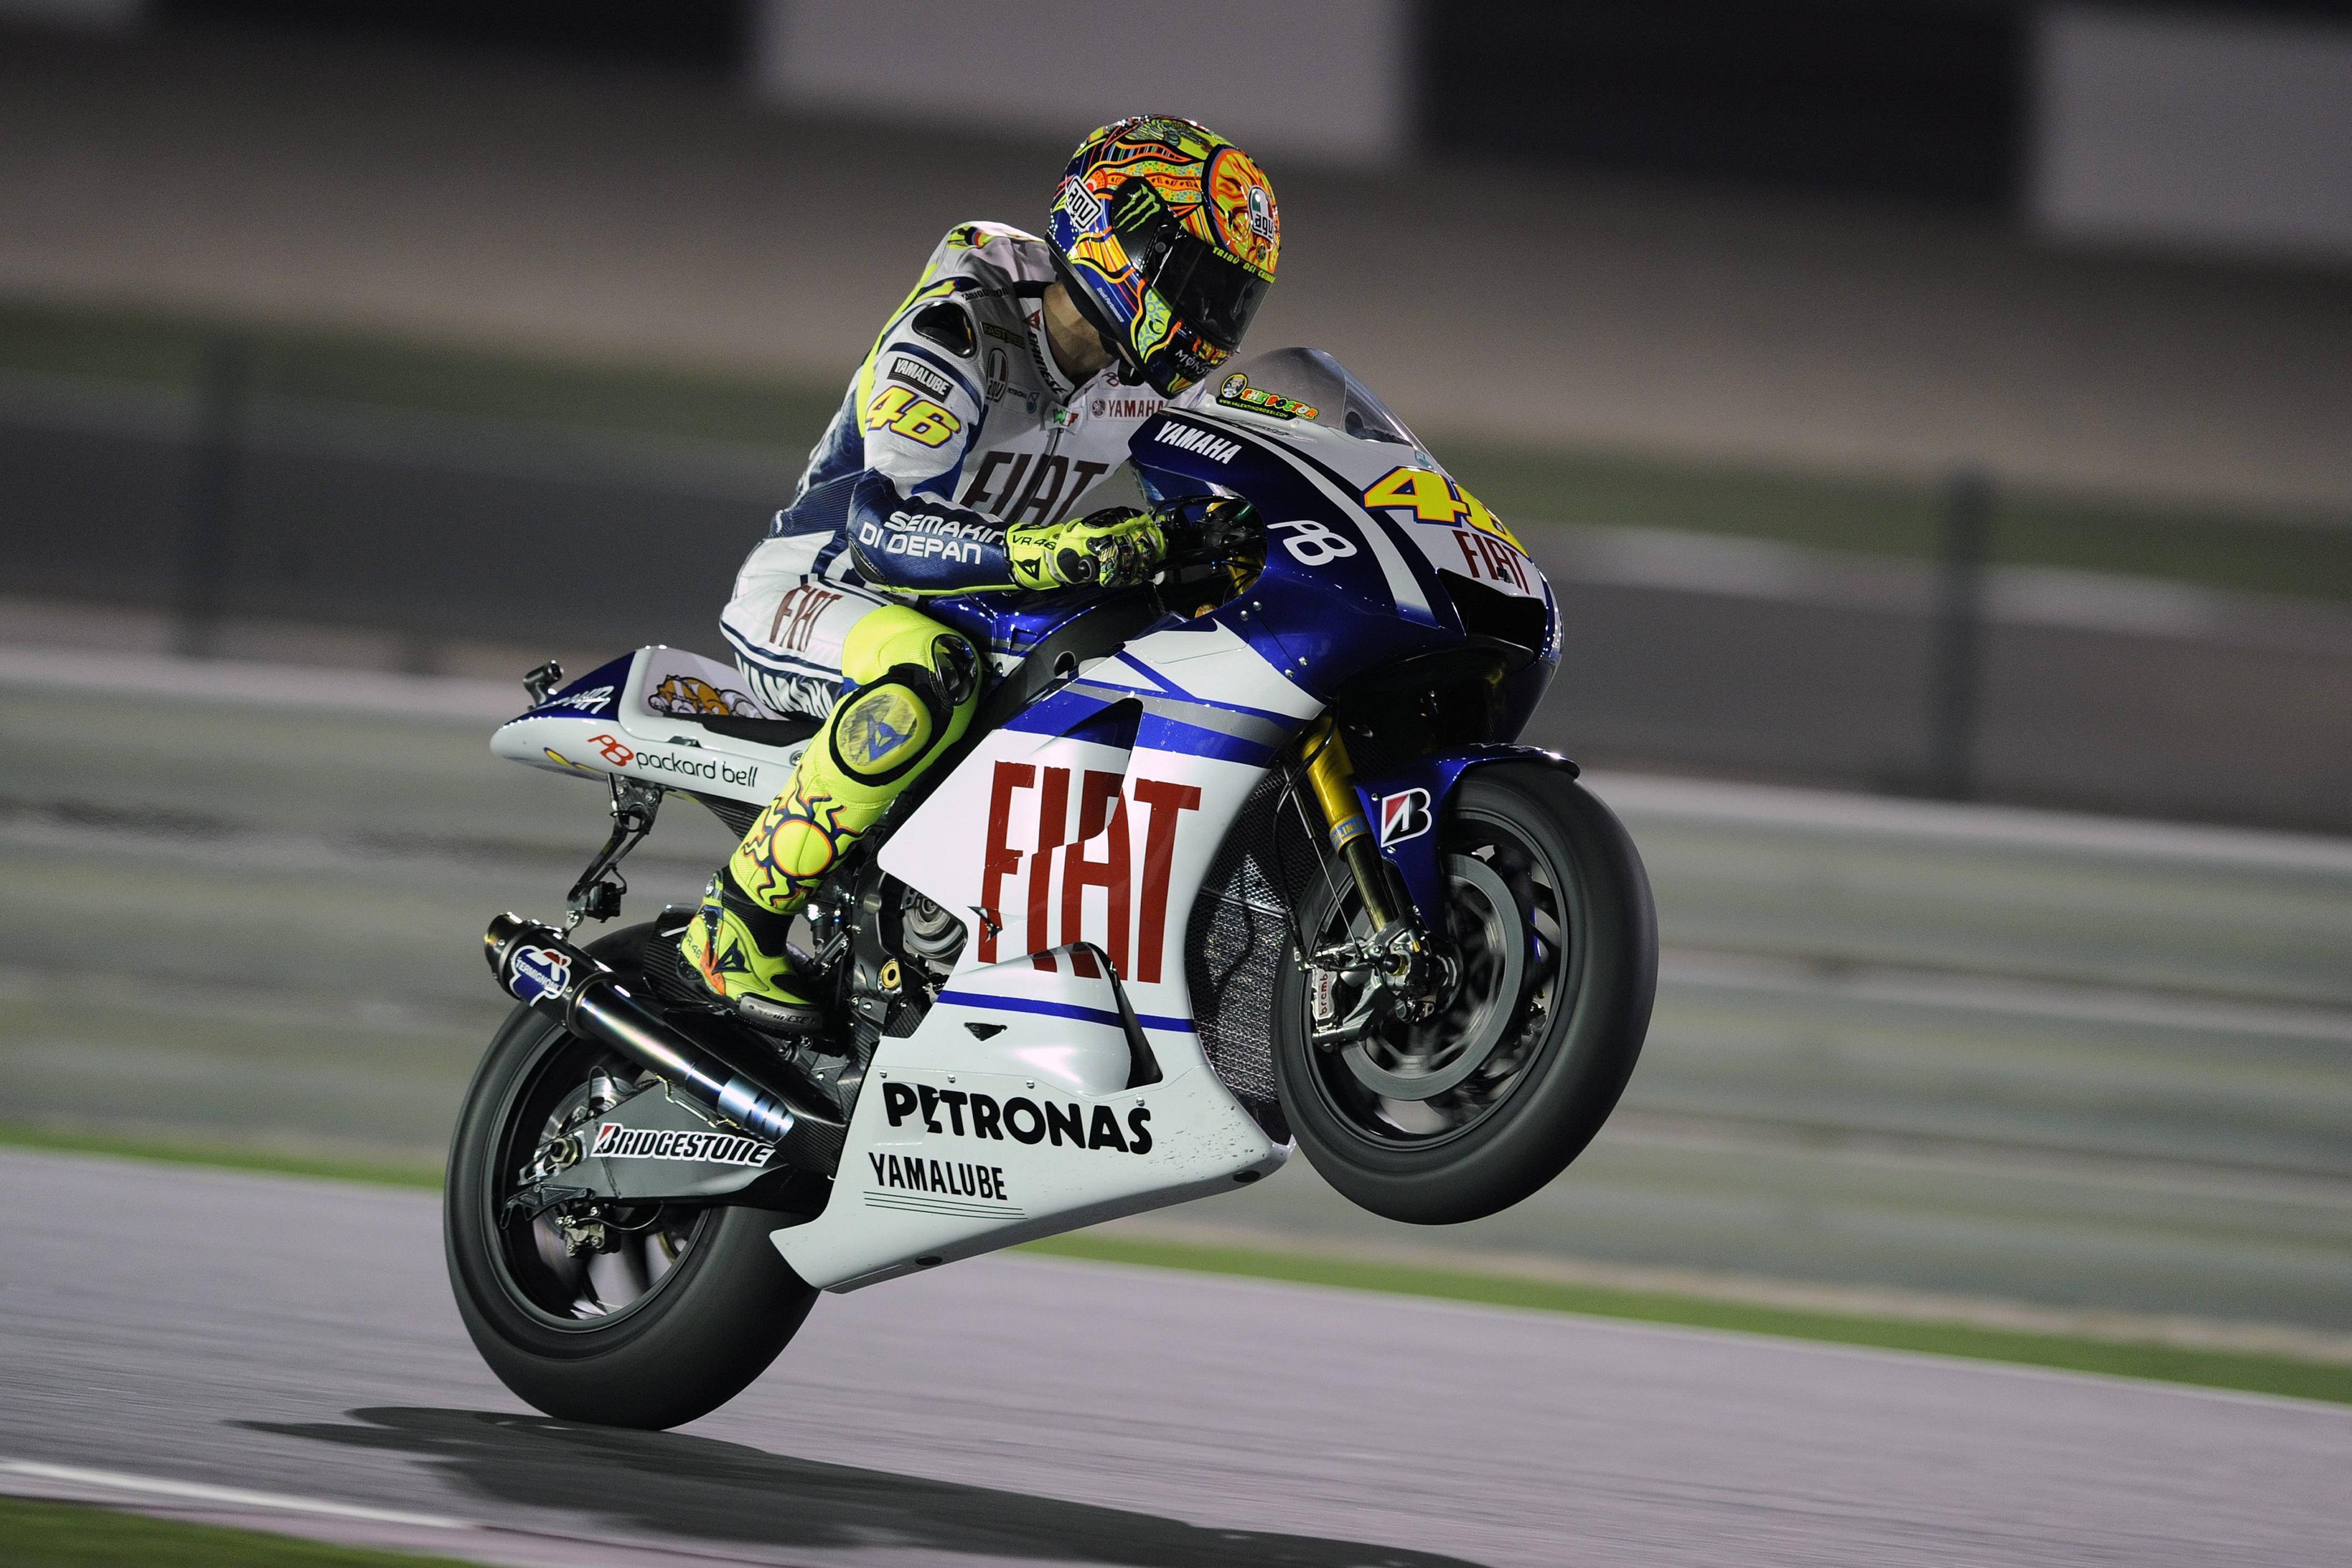 Motogp Thrilling Start To The Season With Rossi Taking First Win